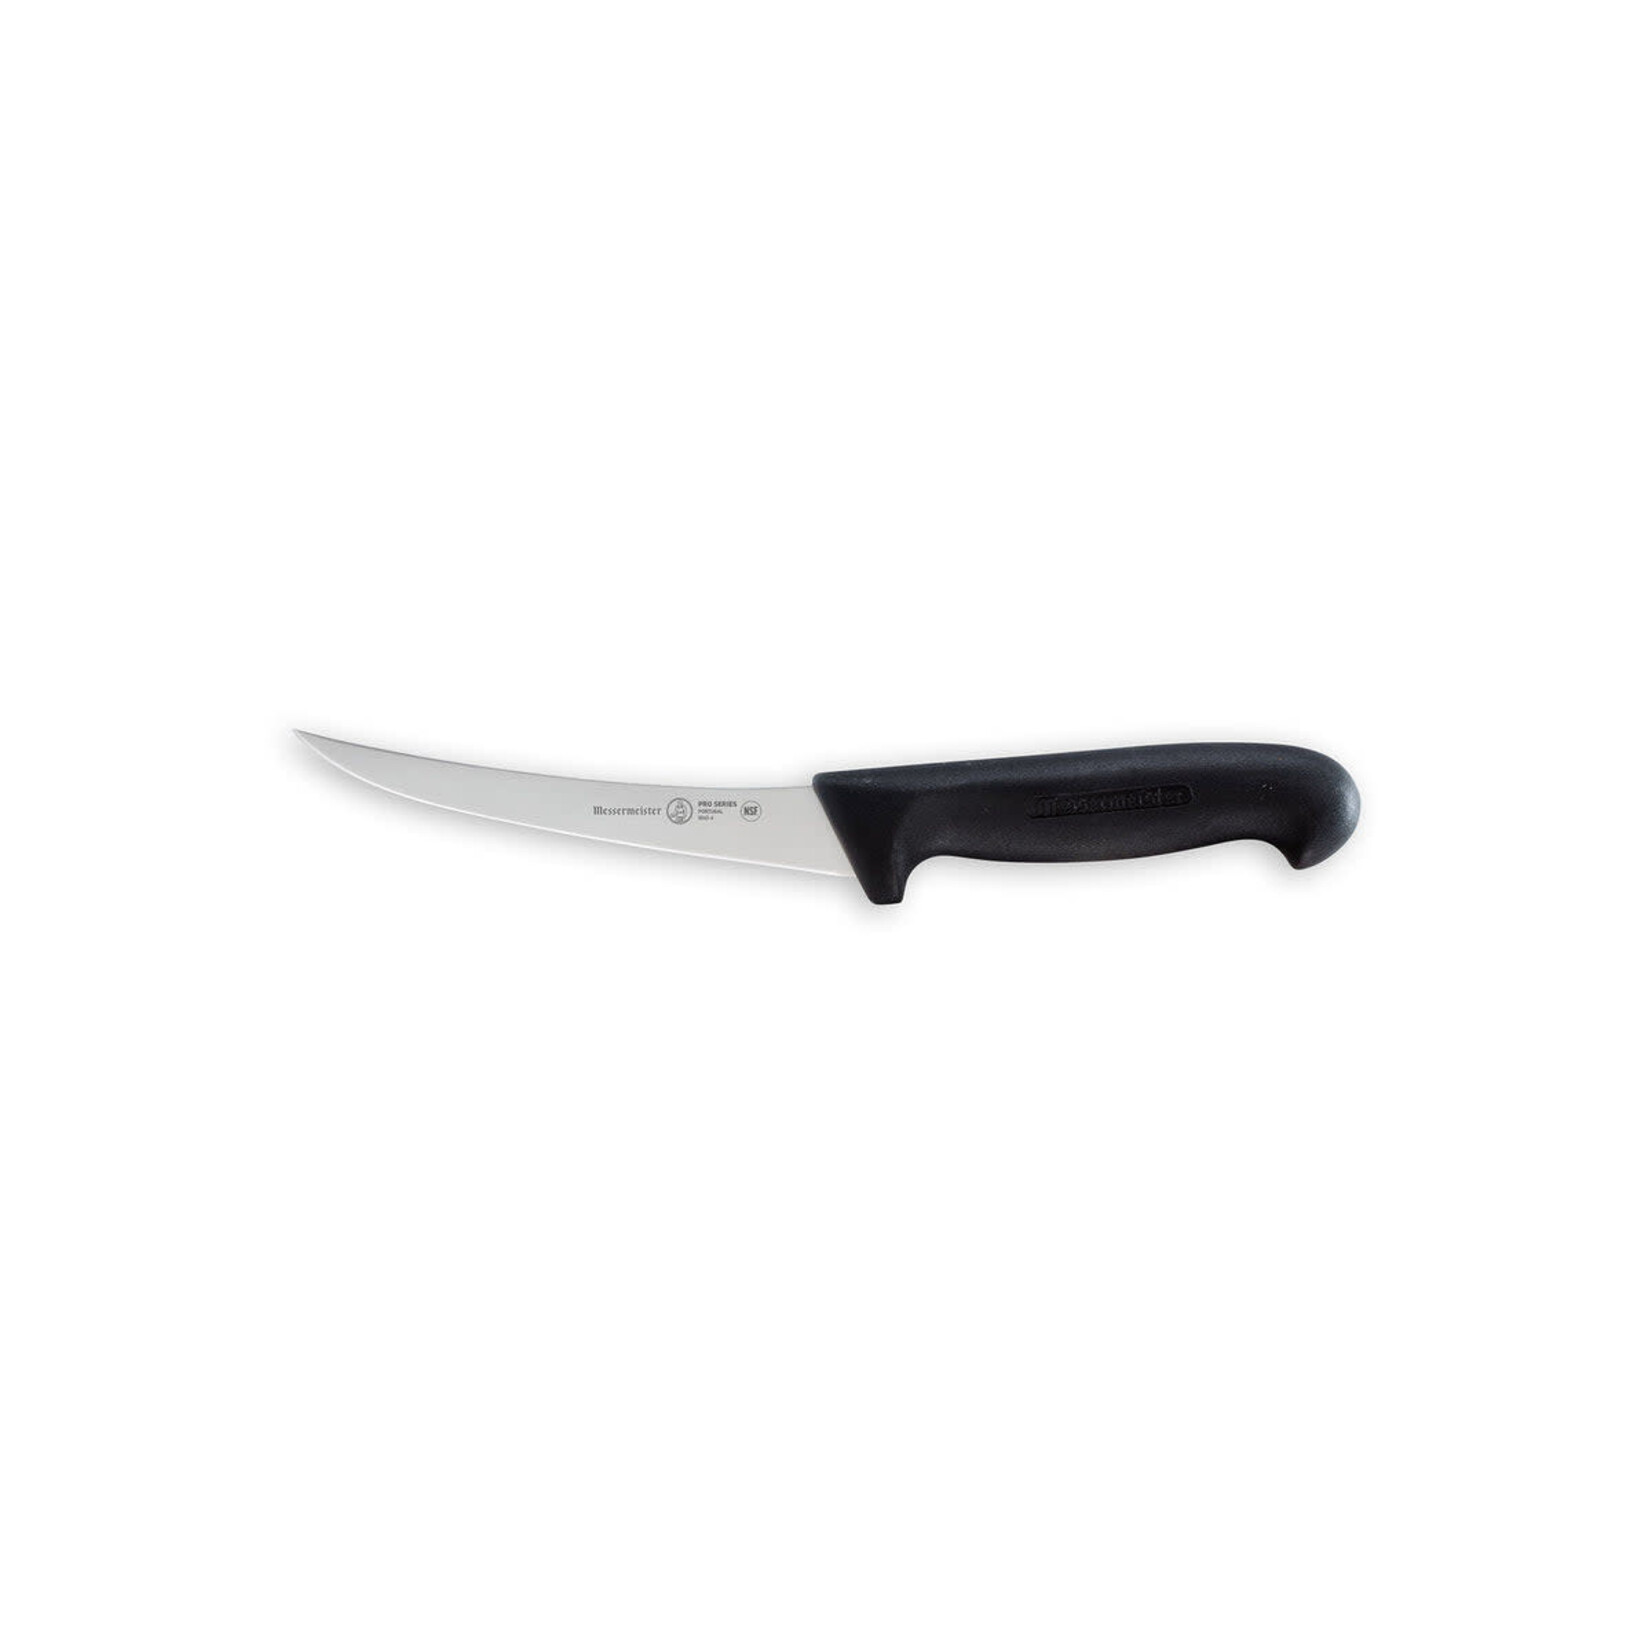 Messermeister Pro Series 6 Inch Curved Boning Knife with Polypropylene Handle